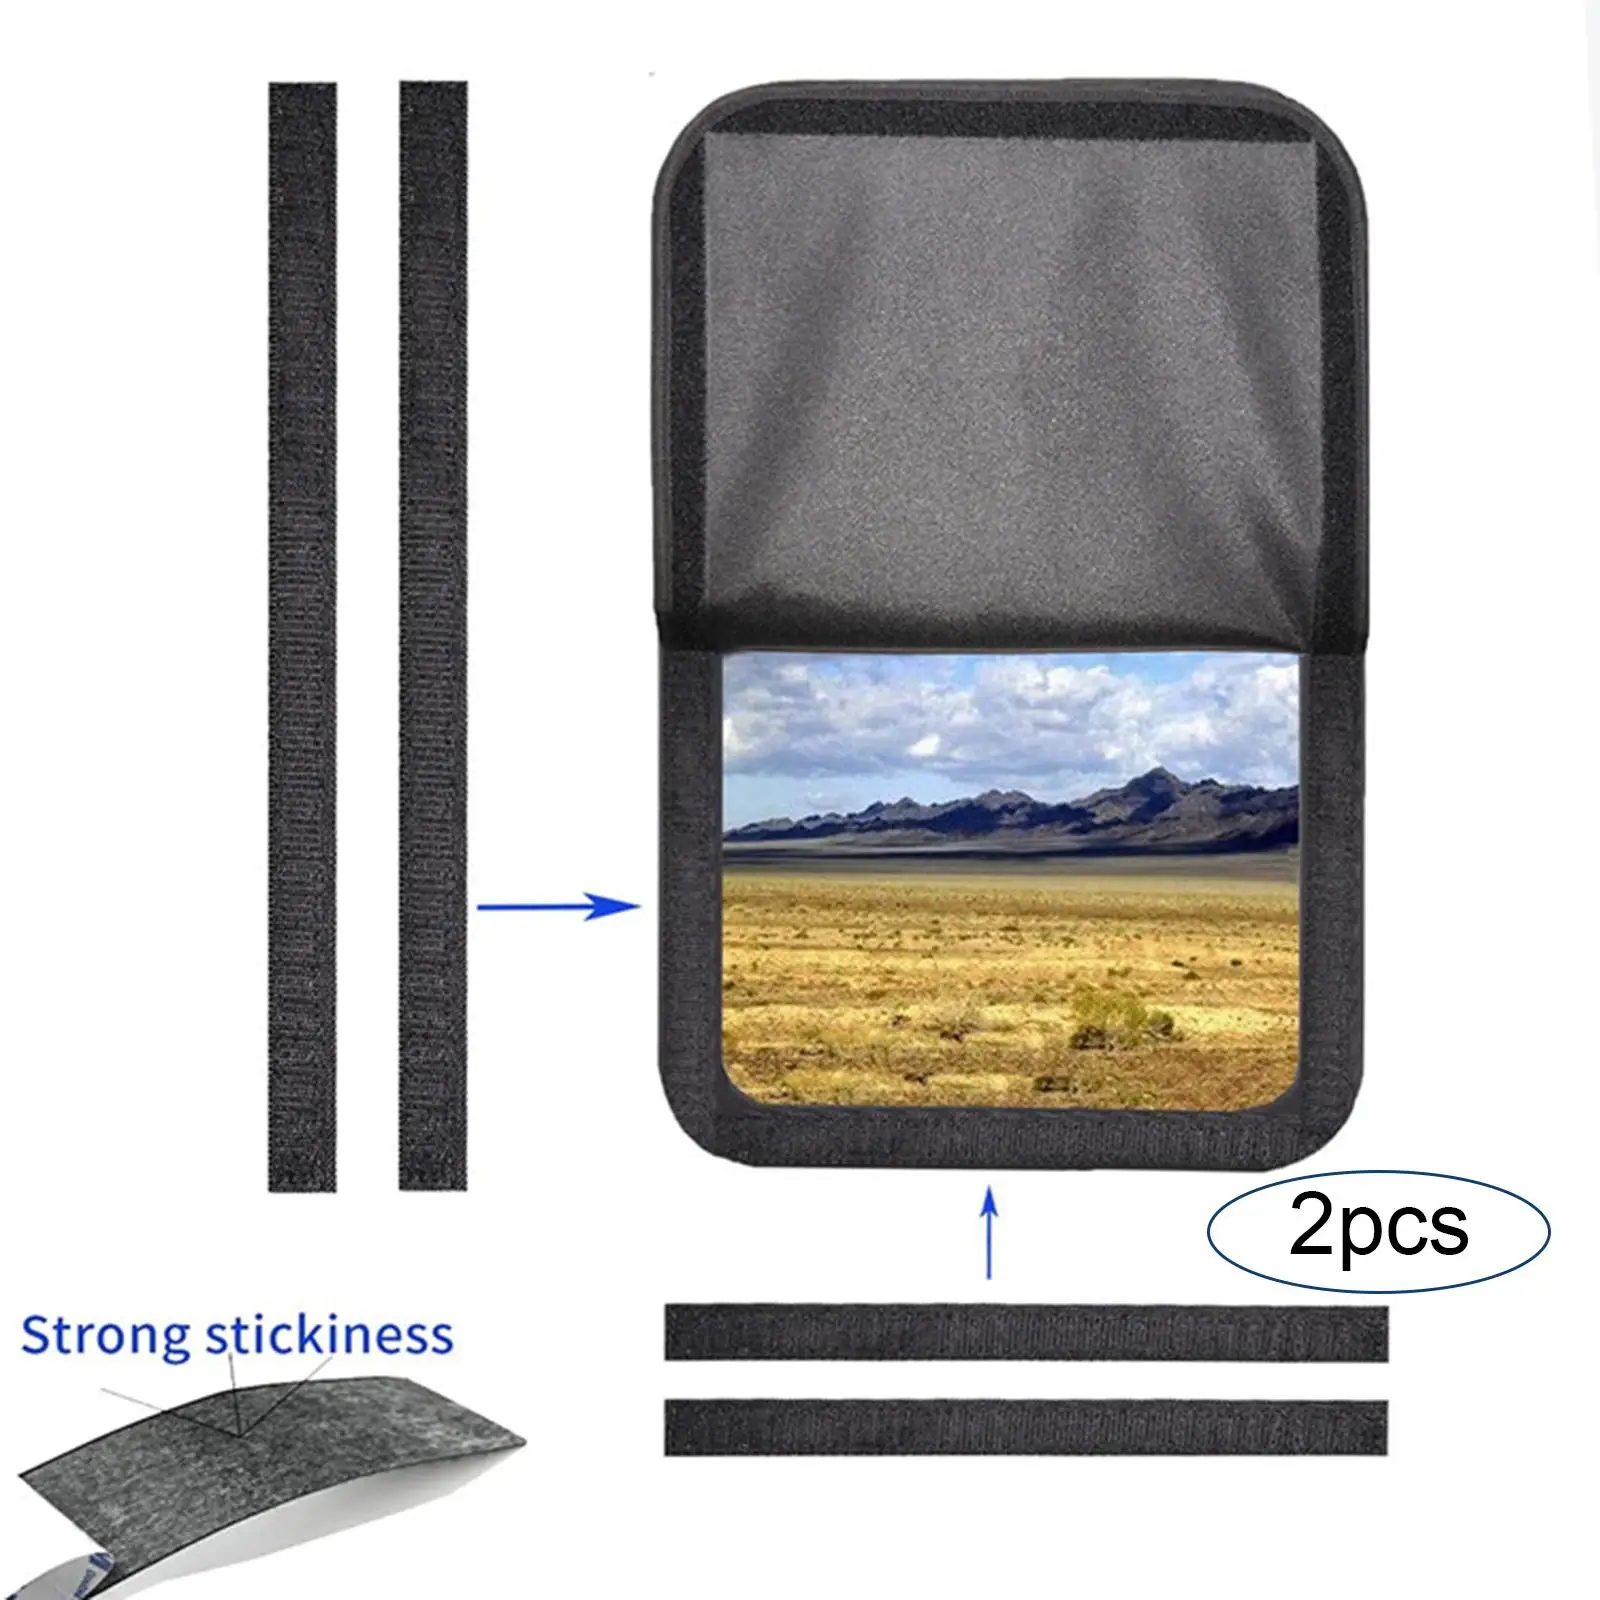 Door Window Fabric Windshield Collapsible Sunshade for Campers Travel Trailers Rvs